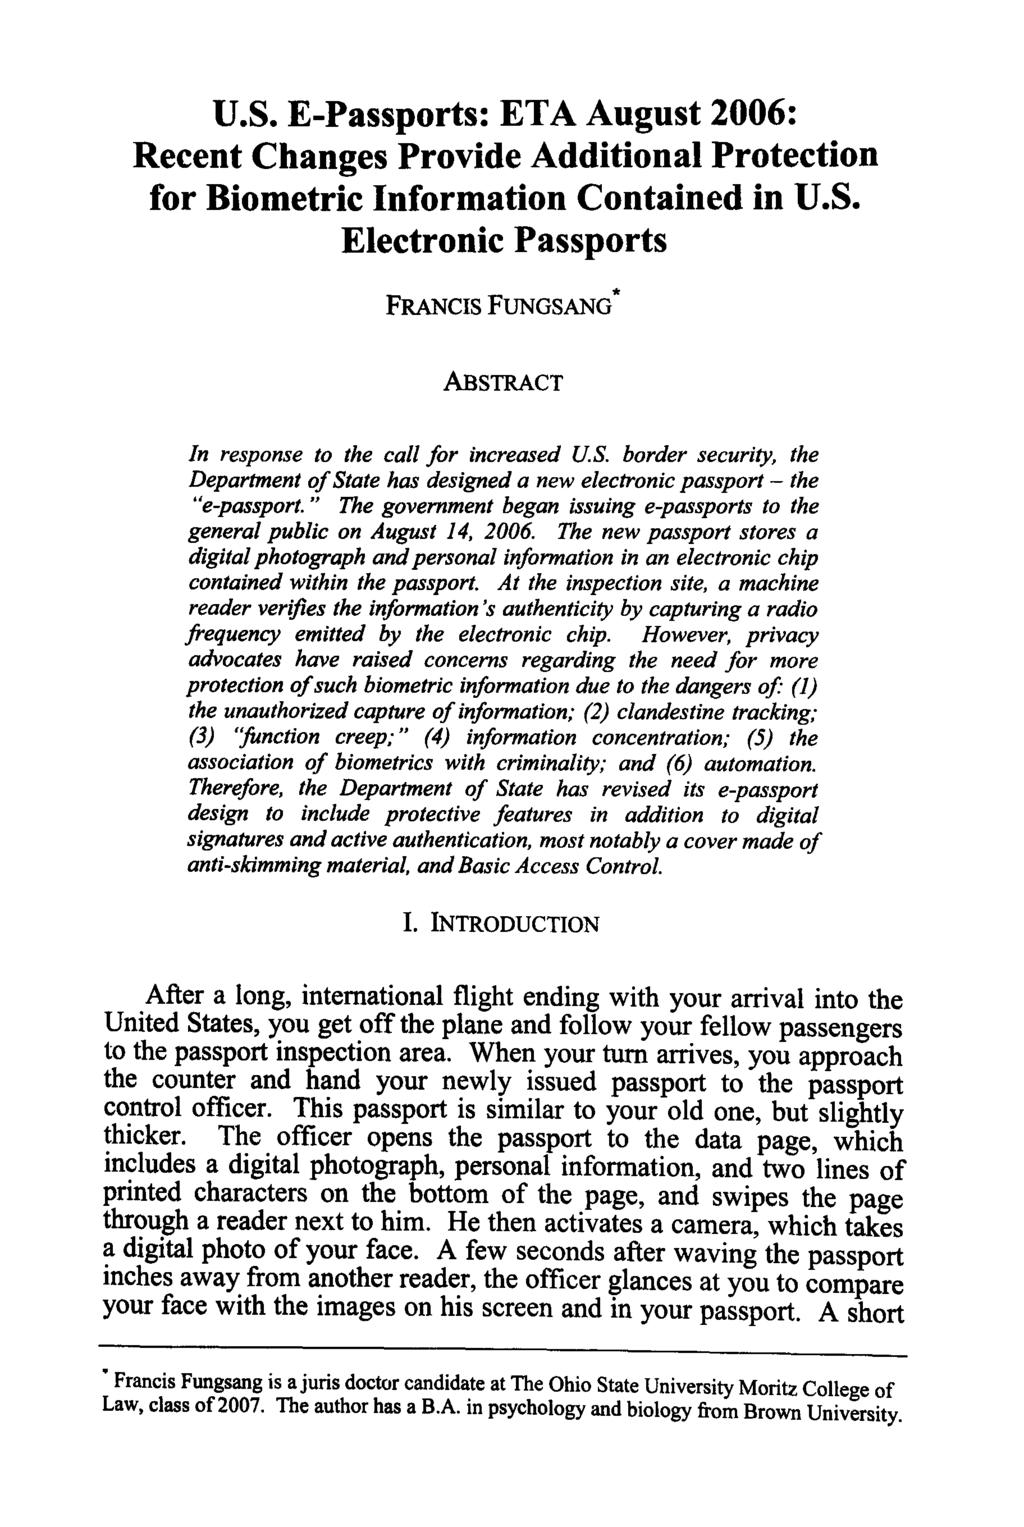 U.S. E-Passports: ETA August 2006: Recent Changes Provide Additional Protection for Biometric Information Contained in U.S. Electronic Passports FRANCIS FUNGSANG* ABSTRACT In response to the call for increased U.